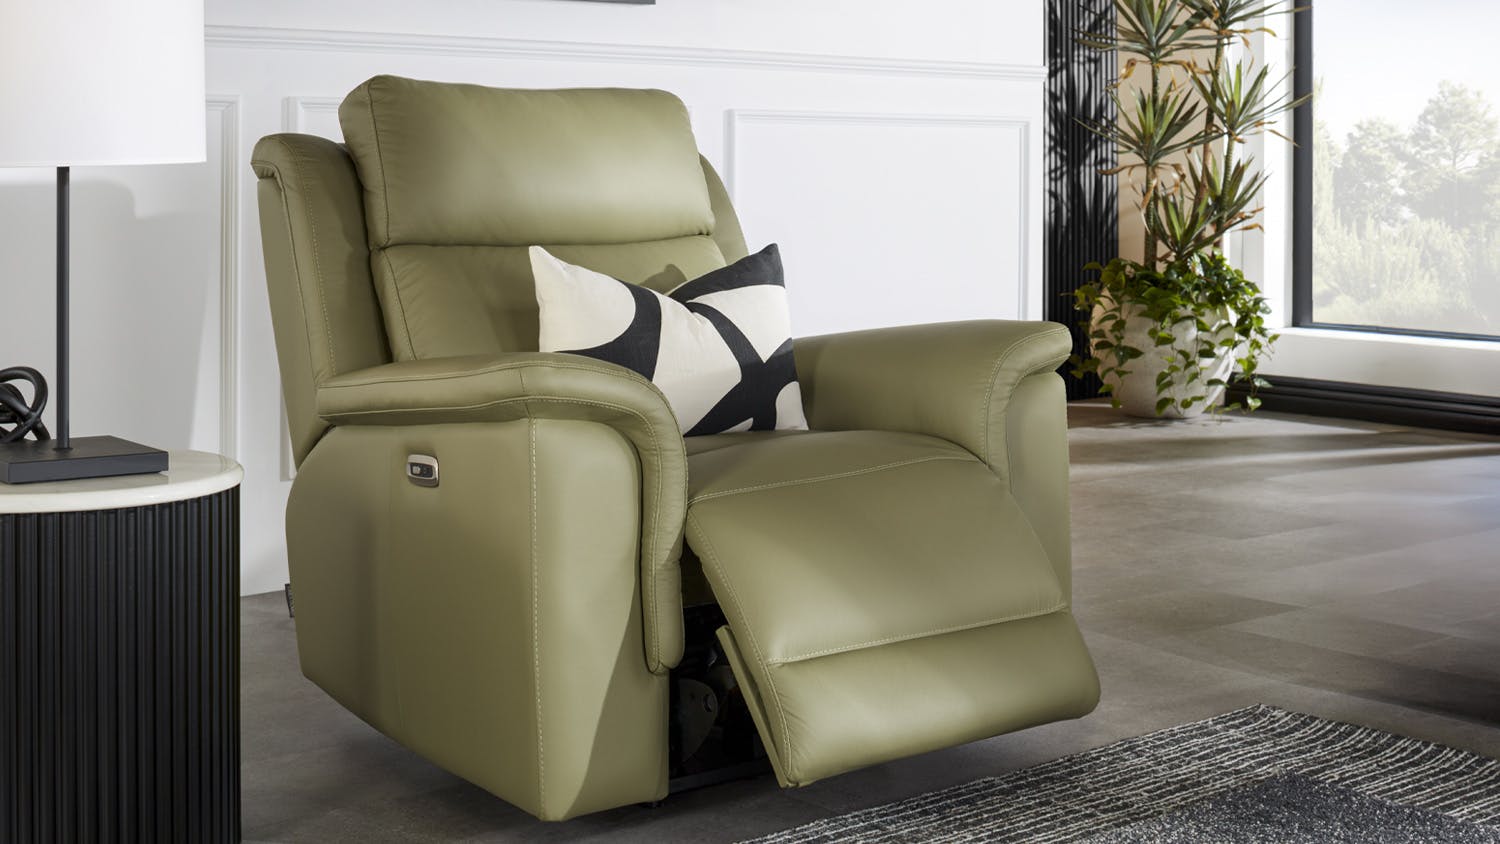 Kobe Leather Electric Recliner Chair